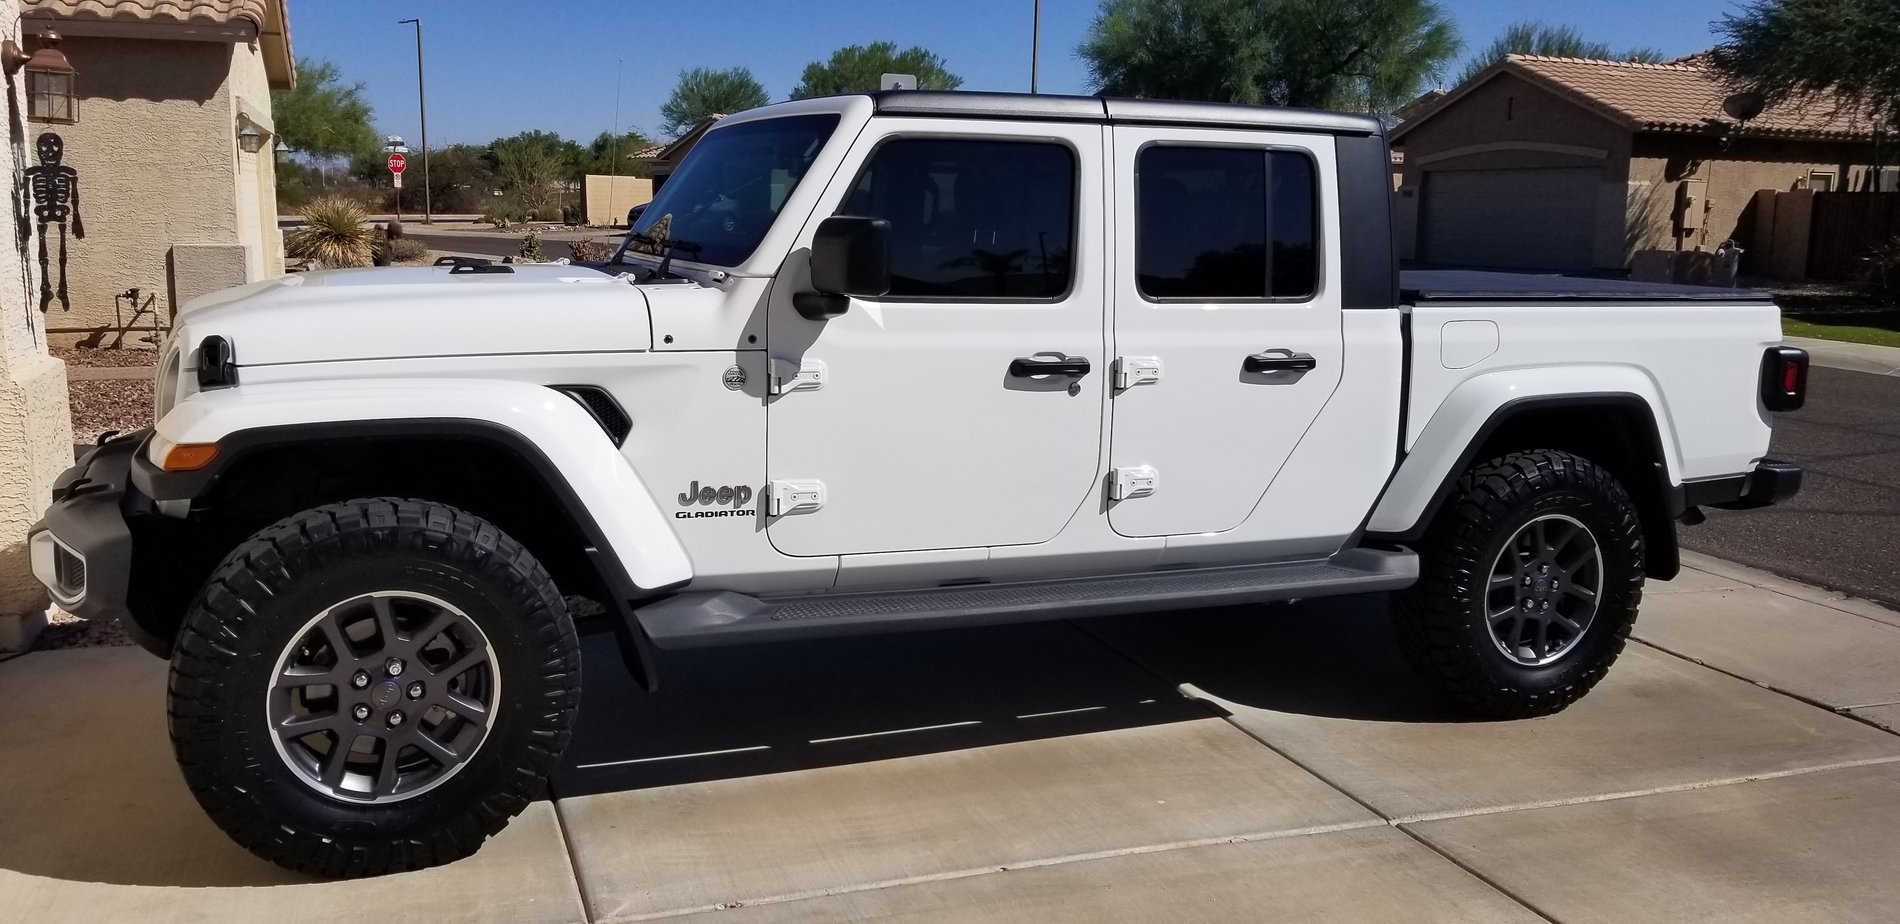 Jeep Gladiator Overland: Mopar lift and mud tire impact? 20201009_140053